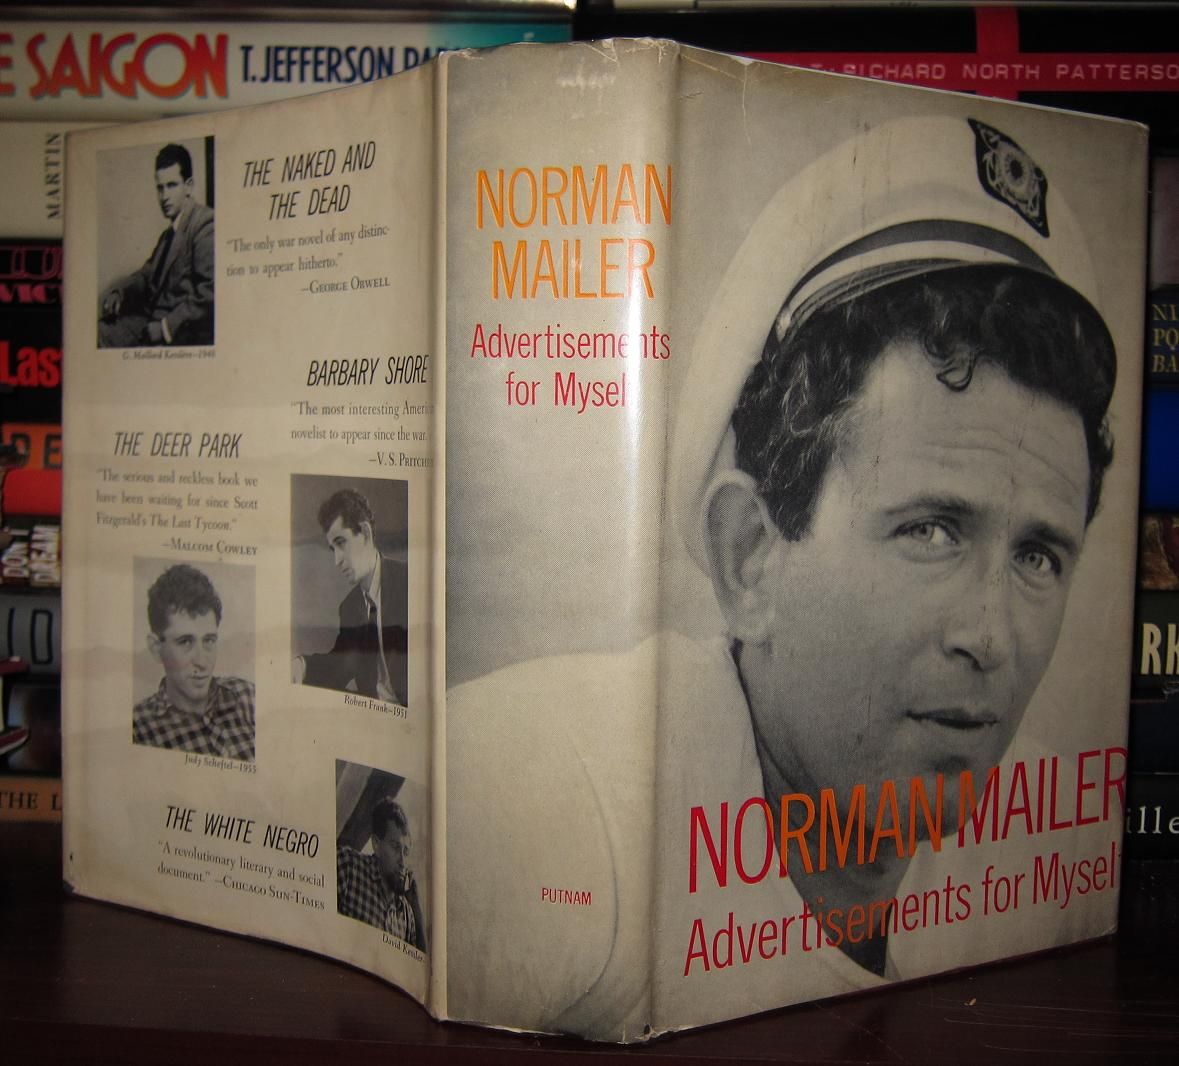 MAILER, NORMAN - Advertisements for Myself